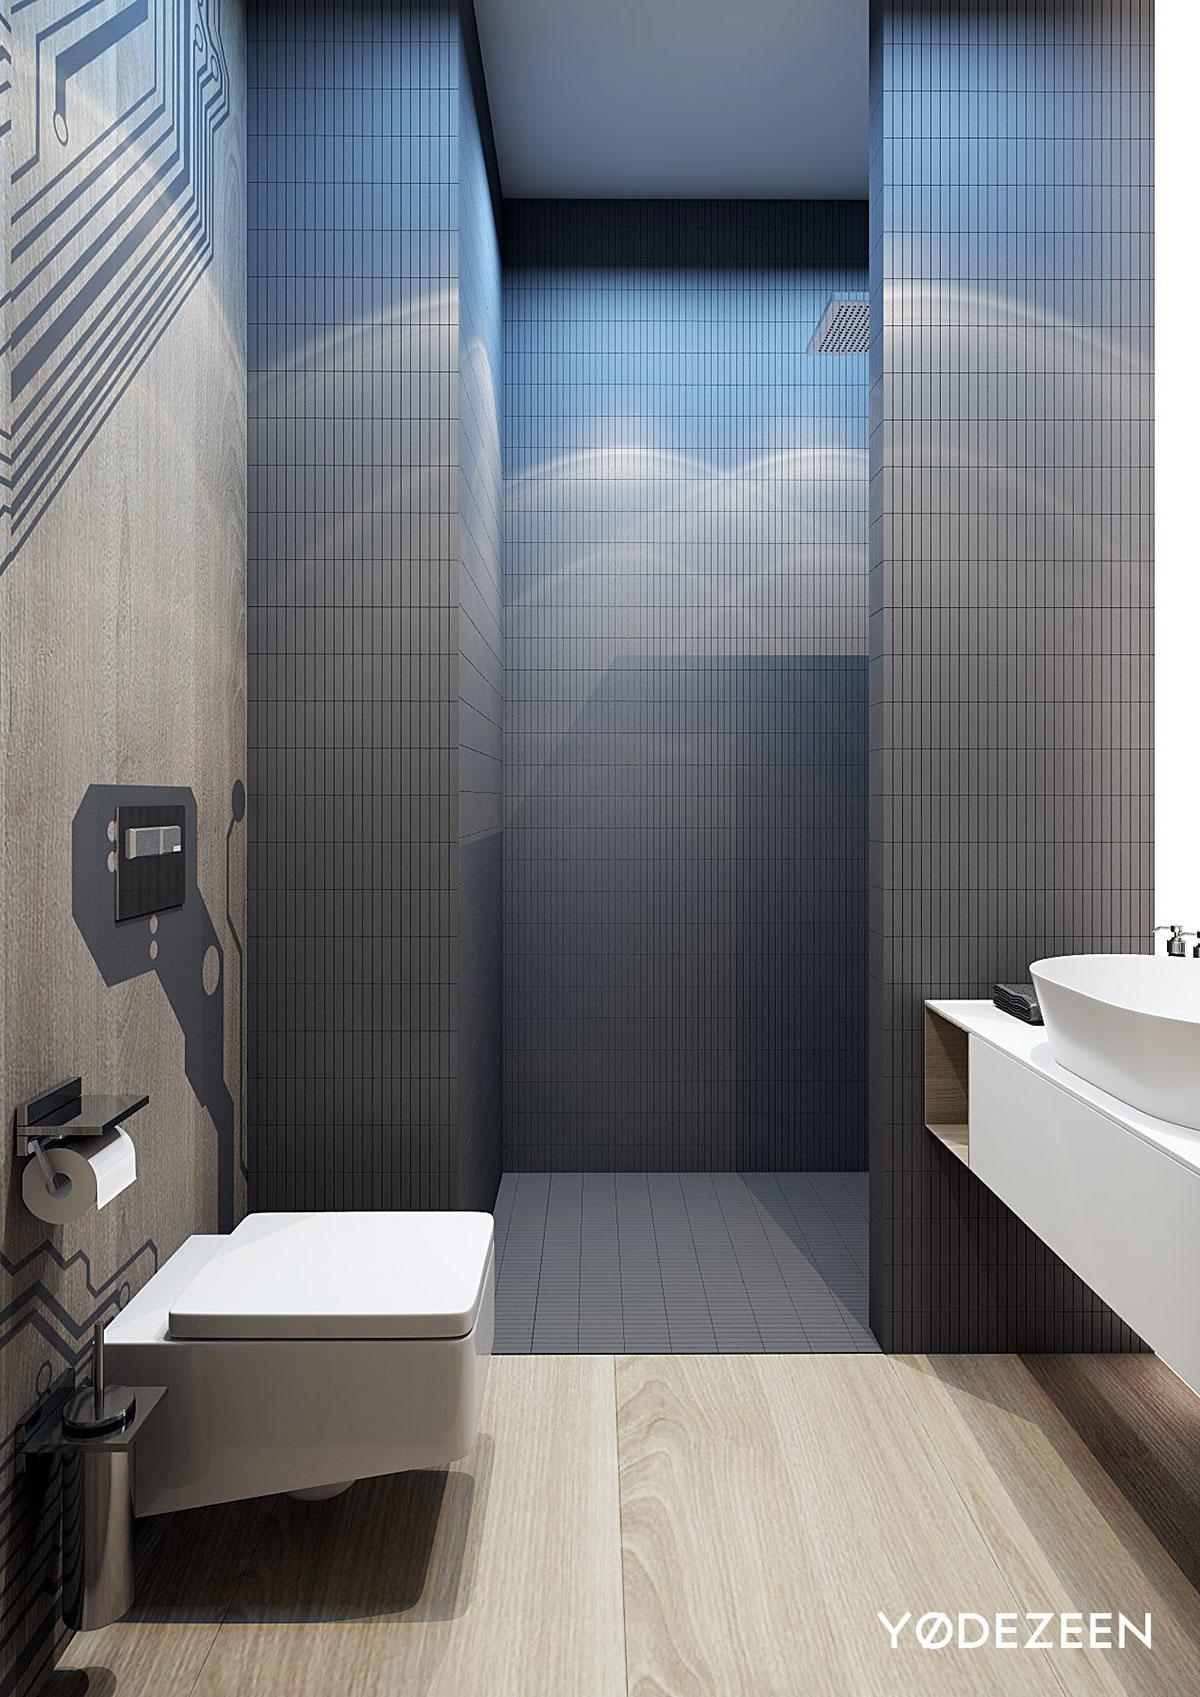 simple gray bathroom "width =" 1200 "height =" 1697 "srcset =" https://mileray.com/wp-content/uploads/2020/05/1588516148_960_Inspiration-For-Bathroom-Decorating-Ideas-With-an-Attractive-Design-Showing.jpg 1200w, https: // myfashionos. com / wp-content / uploads / 2016/09 / YØ-DEZEEN-1-212x300.jpg 212w, https://mileray.com/wp-content/uploads/2016/09/YØ-DEZEEN-1-768x1086.jpg 768w, https://mileray.com/wp-content/uploads/2016/09/YØ-DEZEEN-1-724x1024.jpg 724w, https://mileray.com/wp-content/uploads/2016/09/YØ -DEZEEN-1-696x984.jpg 696w, https://mileray.com/wp-content/uploads/2016/09/YØ-DEZEEN-1-1068x1510.jpg 1068w, https://mileray.com/wp-content /uploads/2016/09/YØ-DEZEEN-1-297x420.jpg 297w "sizes =" (maximum width: 1200px) 100vw, 1200px